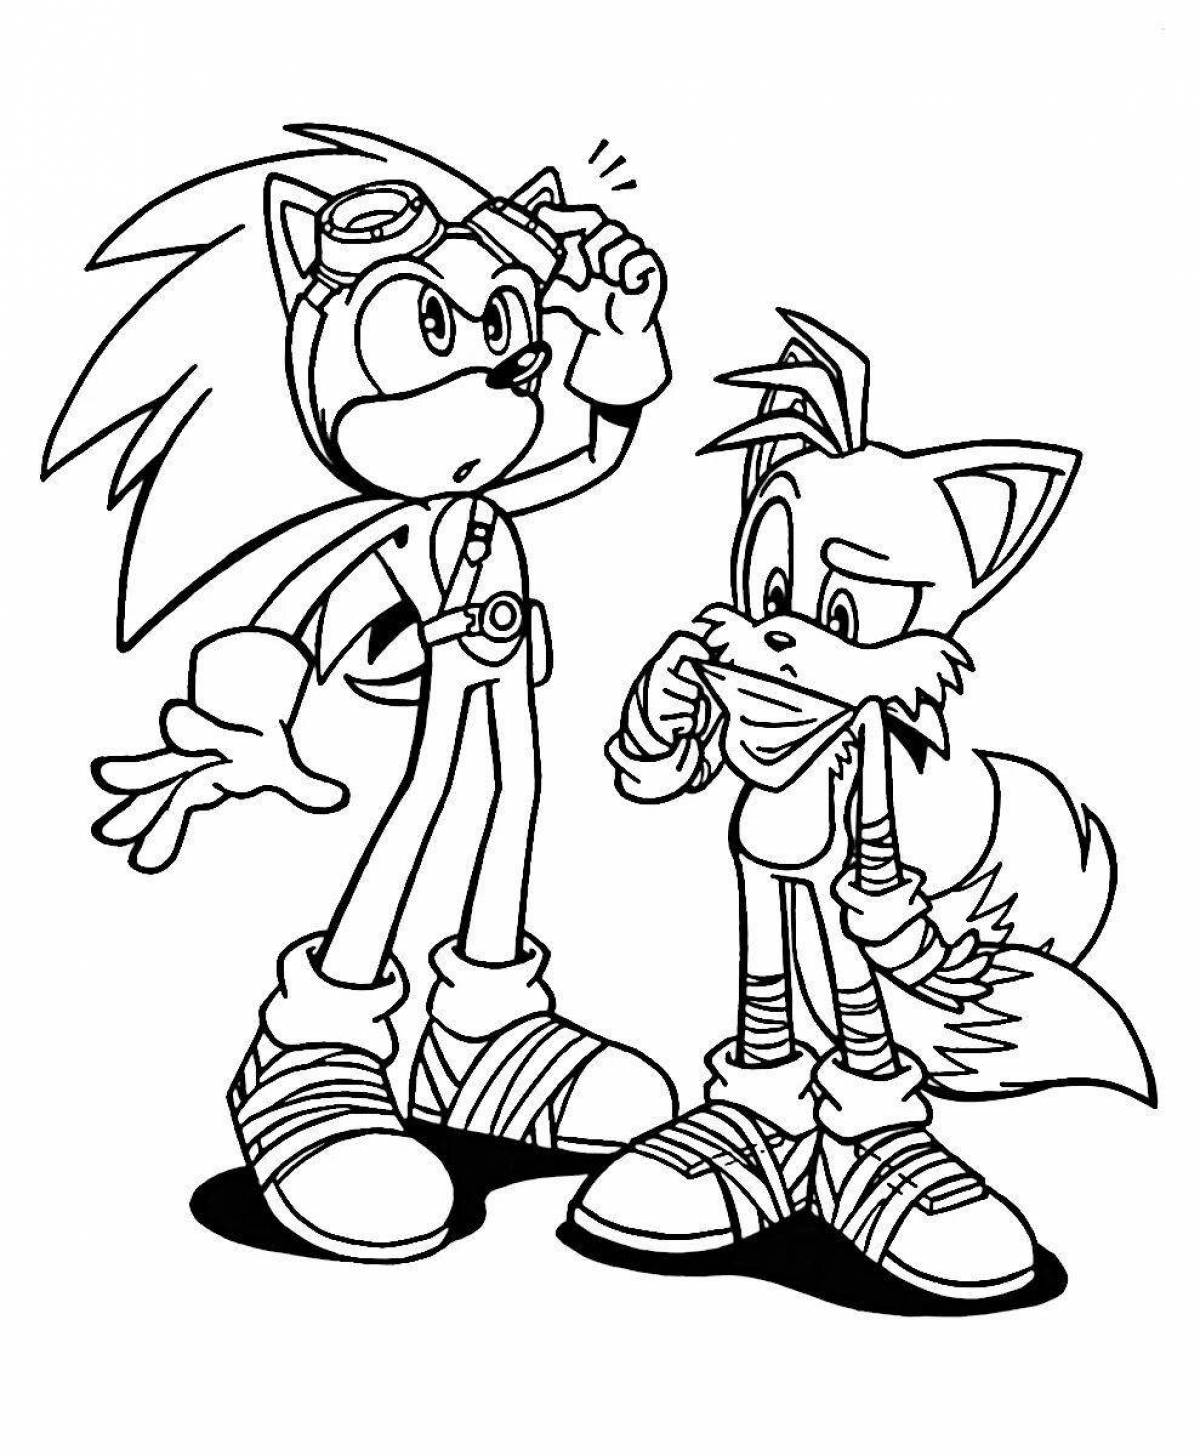 Fascinating tails exe coloring